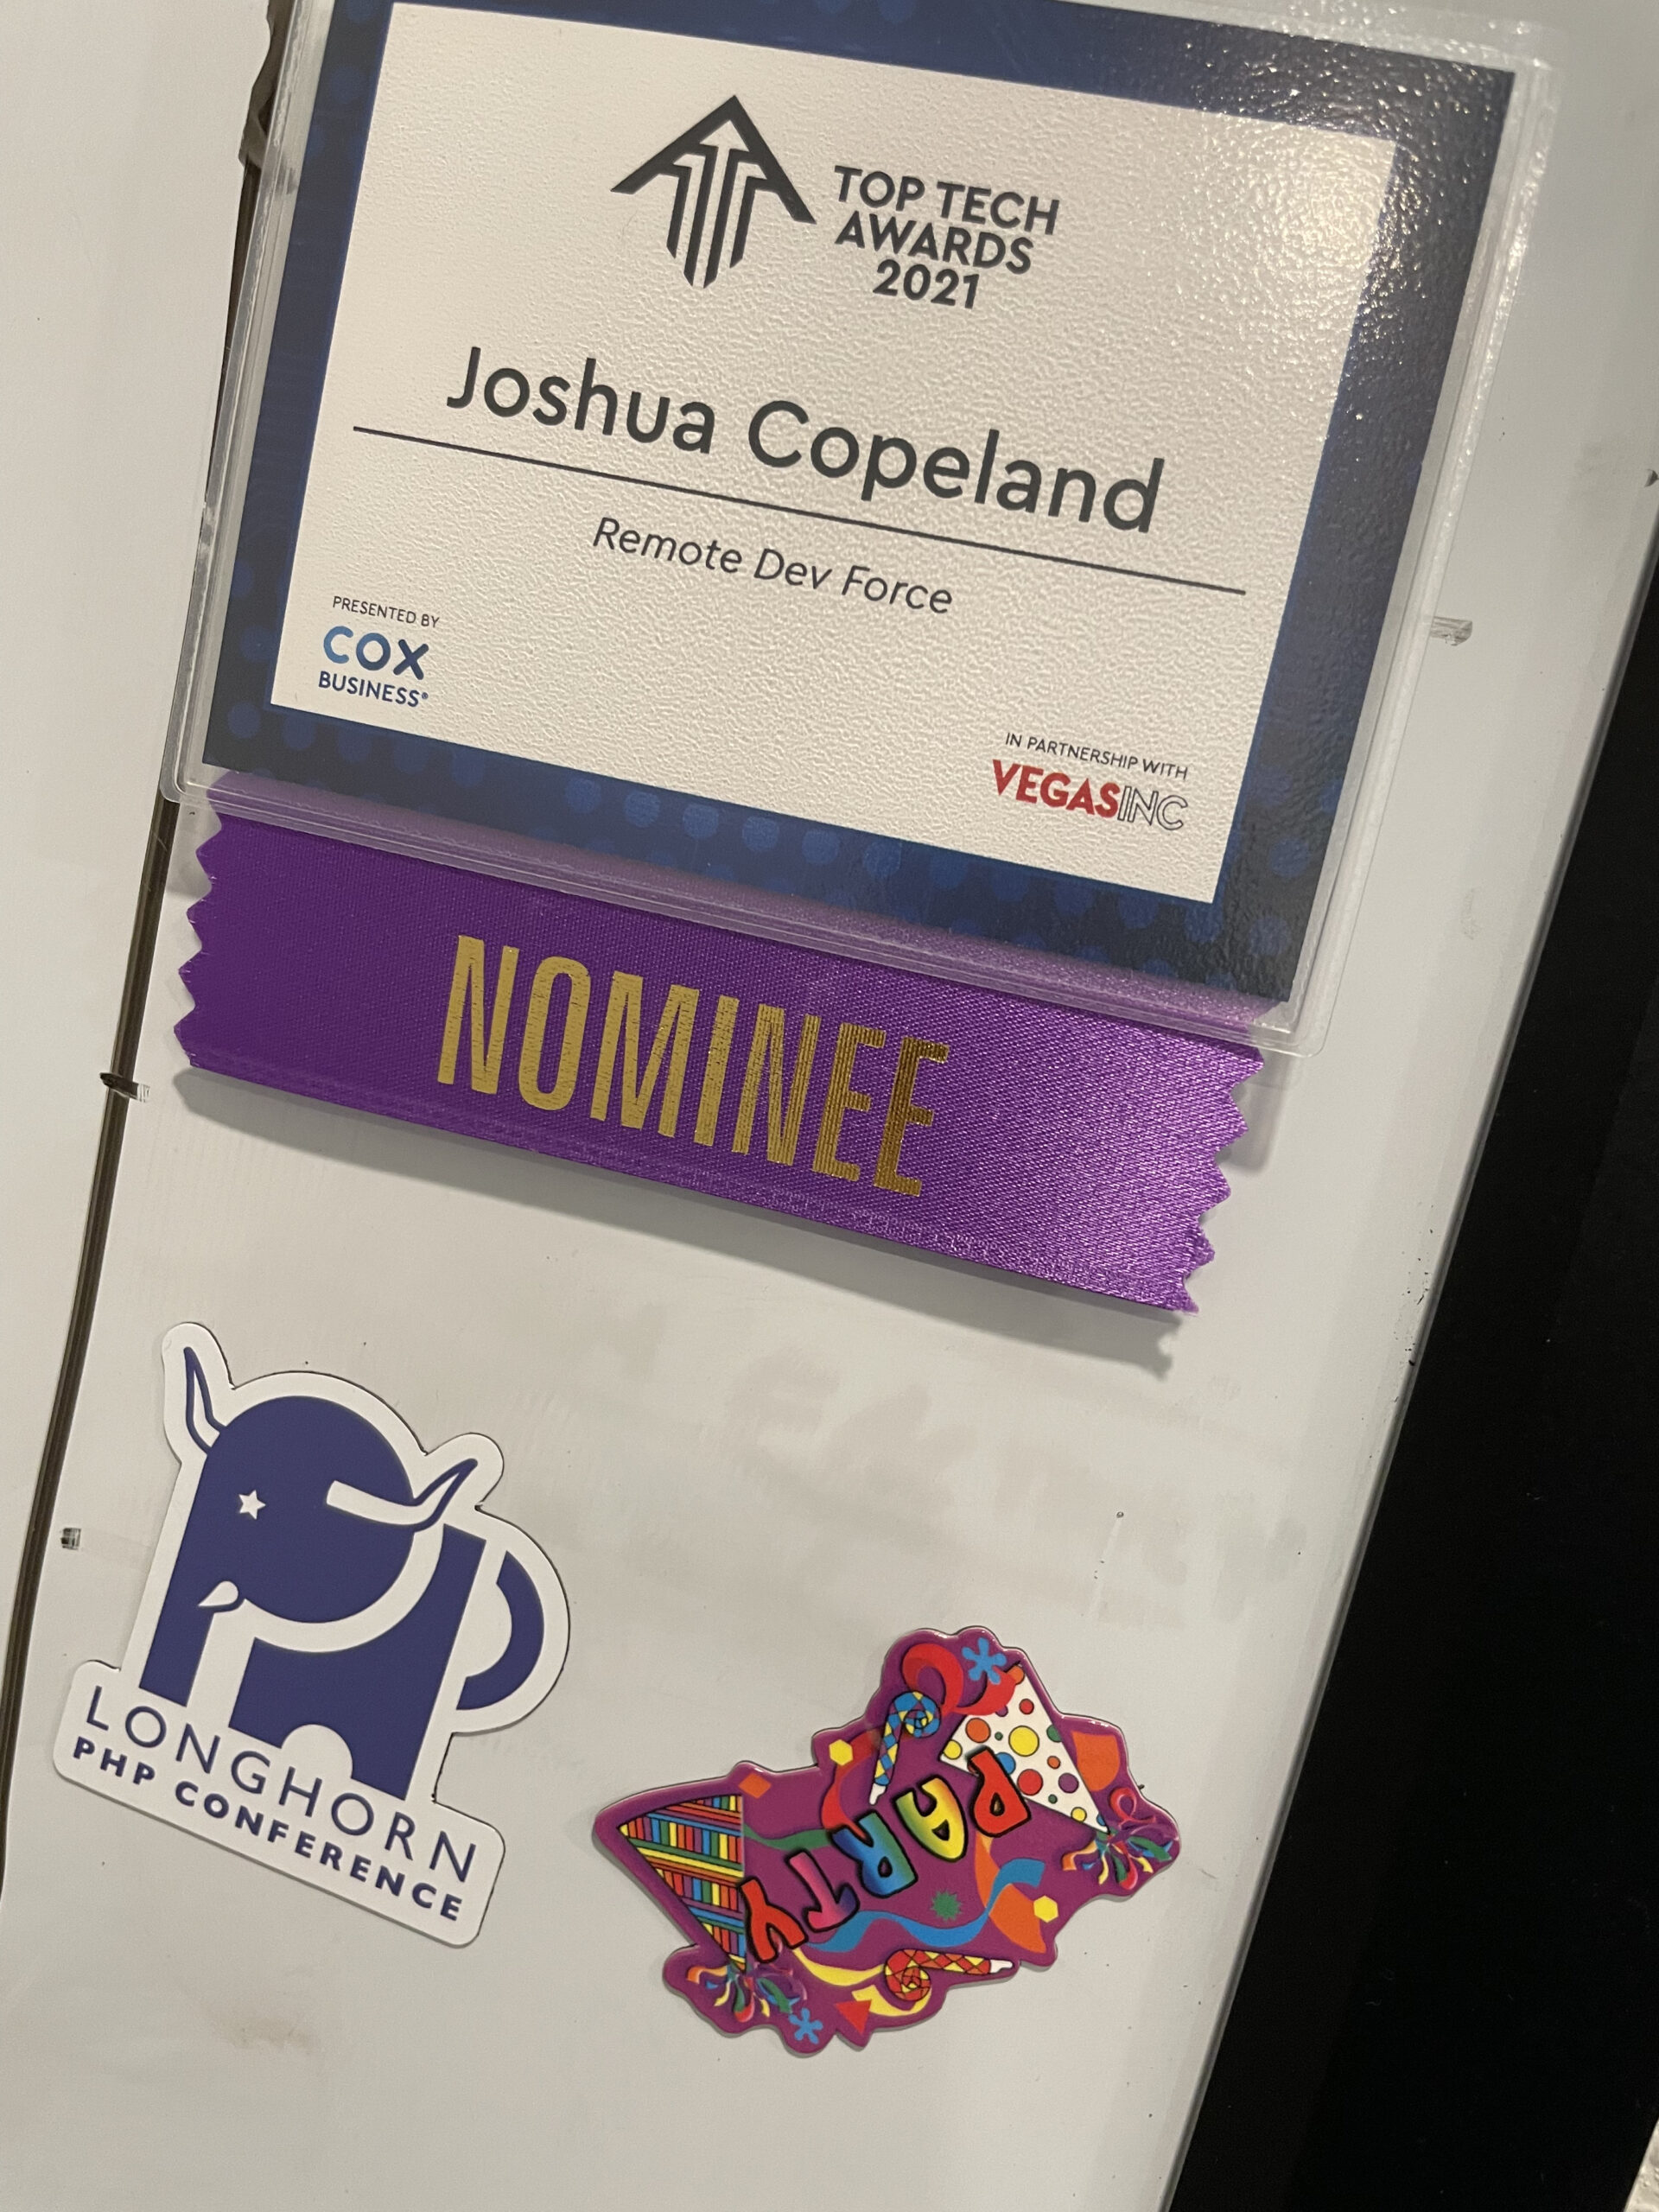 Joshua Copeland With Remote Dev Force as CTO Nominated for a Top Tech Award